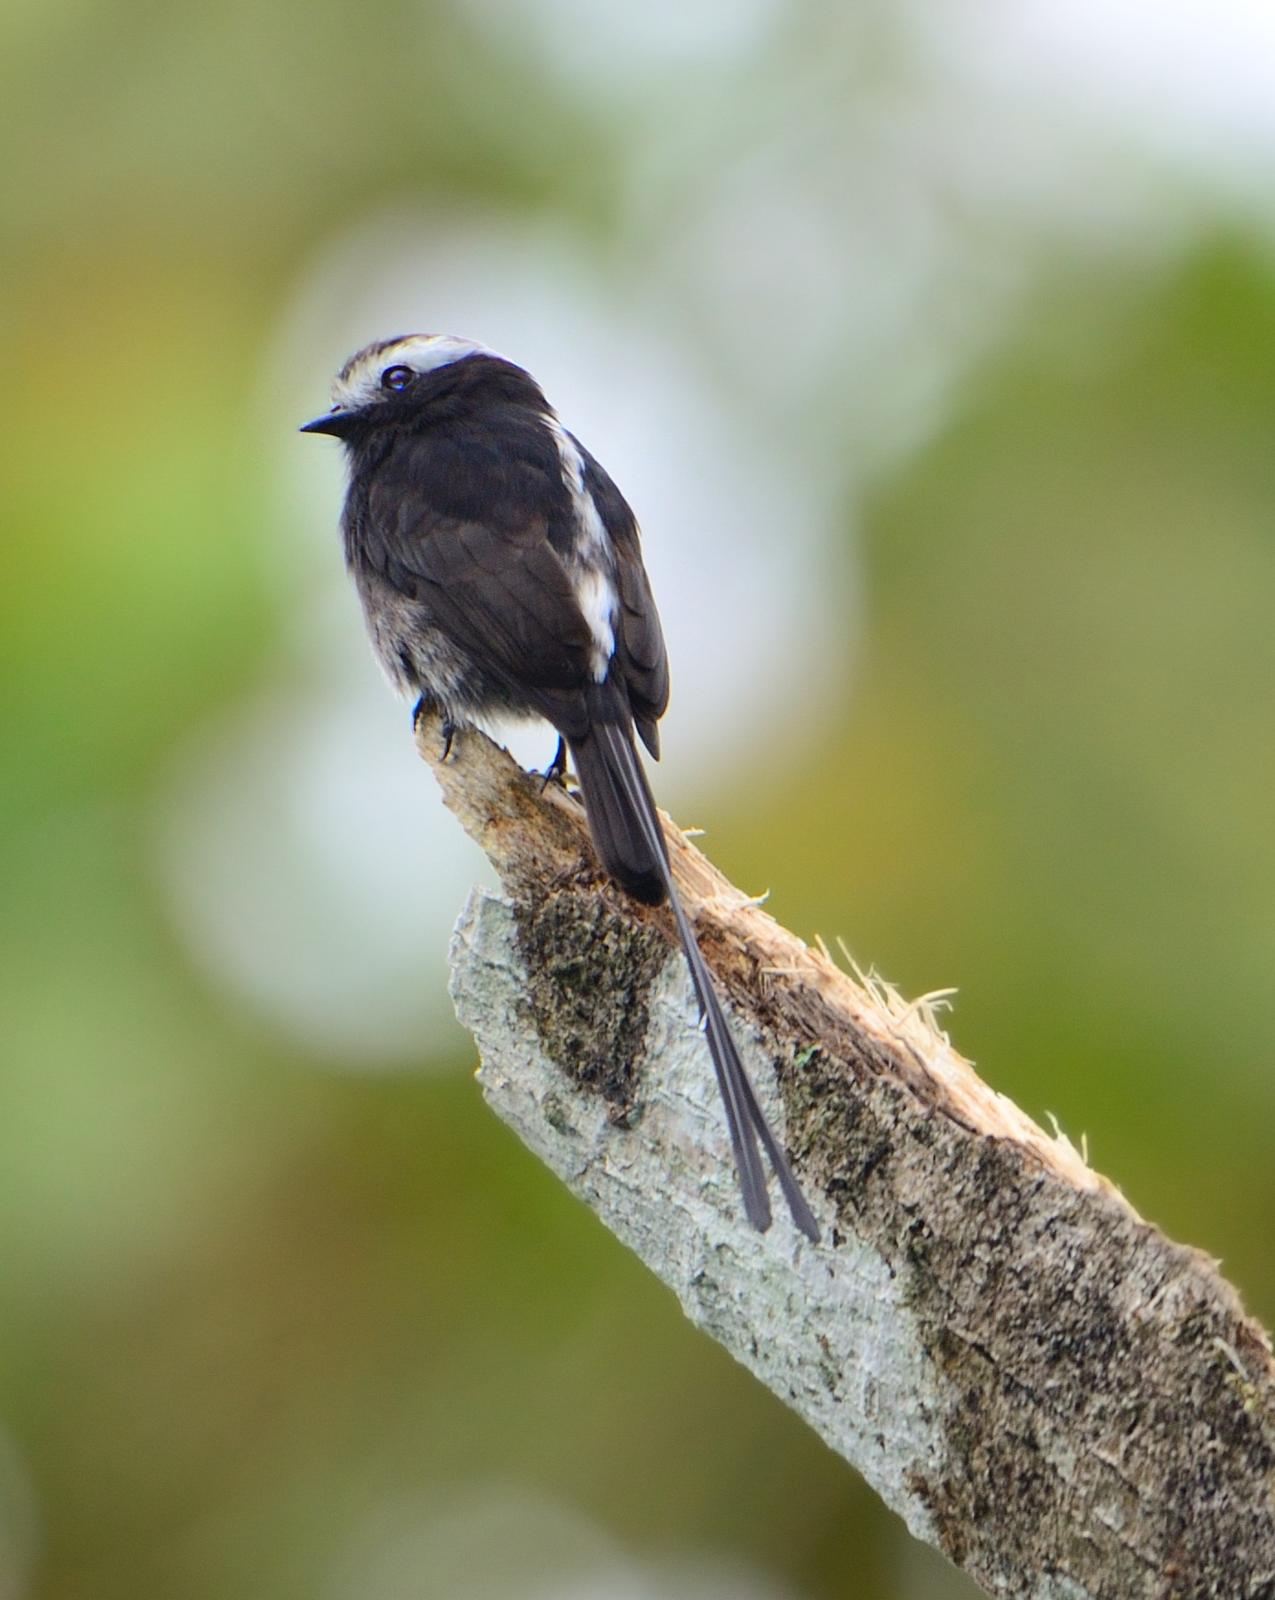 Long-tailed Tyrant Photo by Laurence Pellegrini